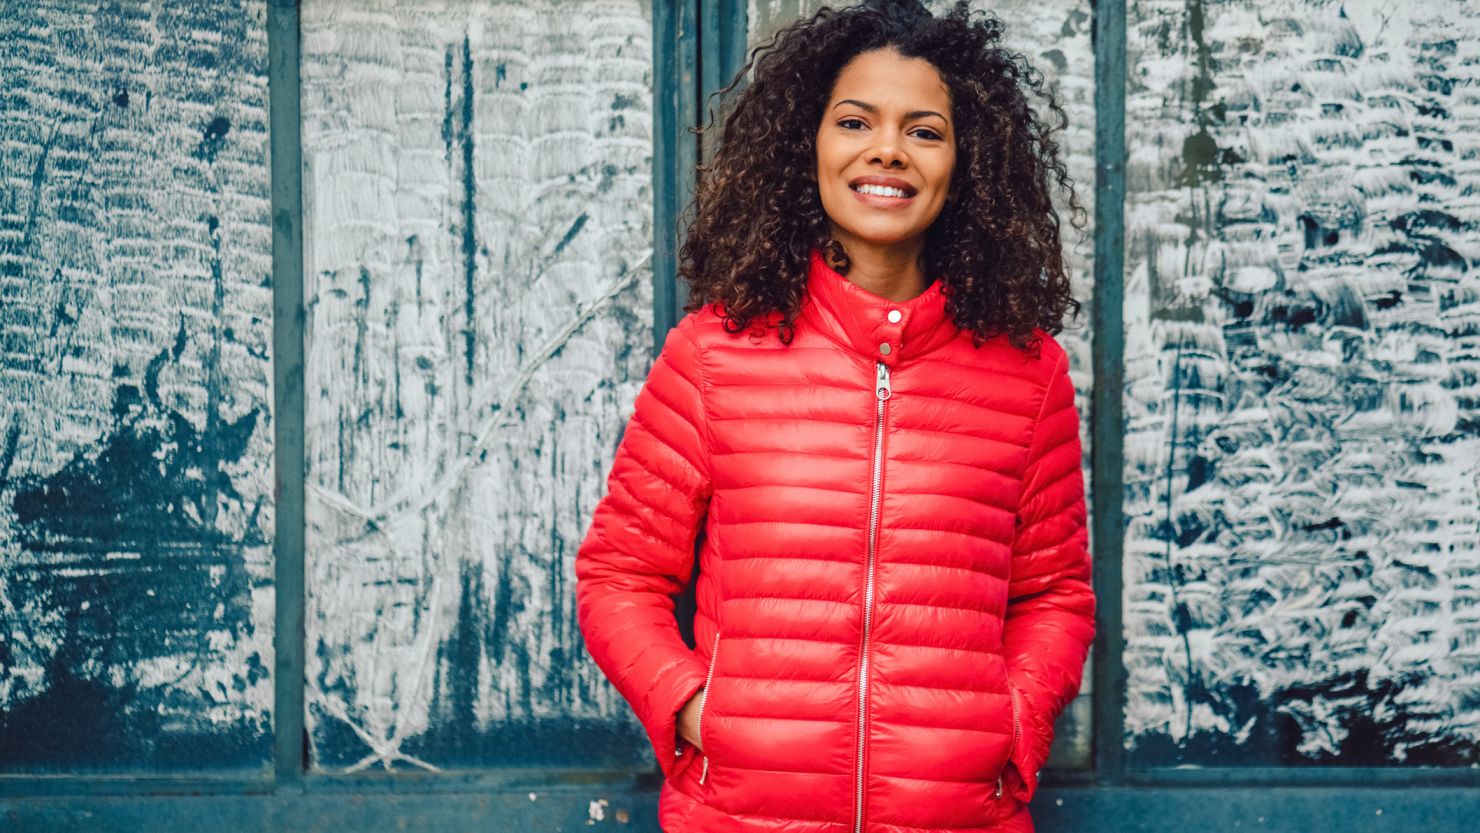 The Best Packable Jackets for Women